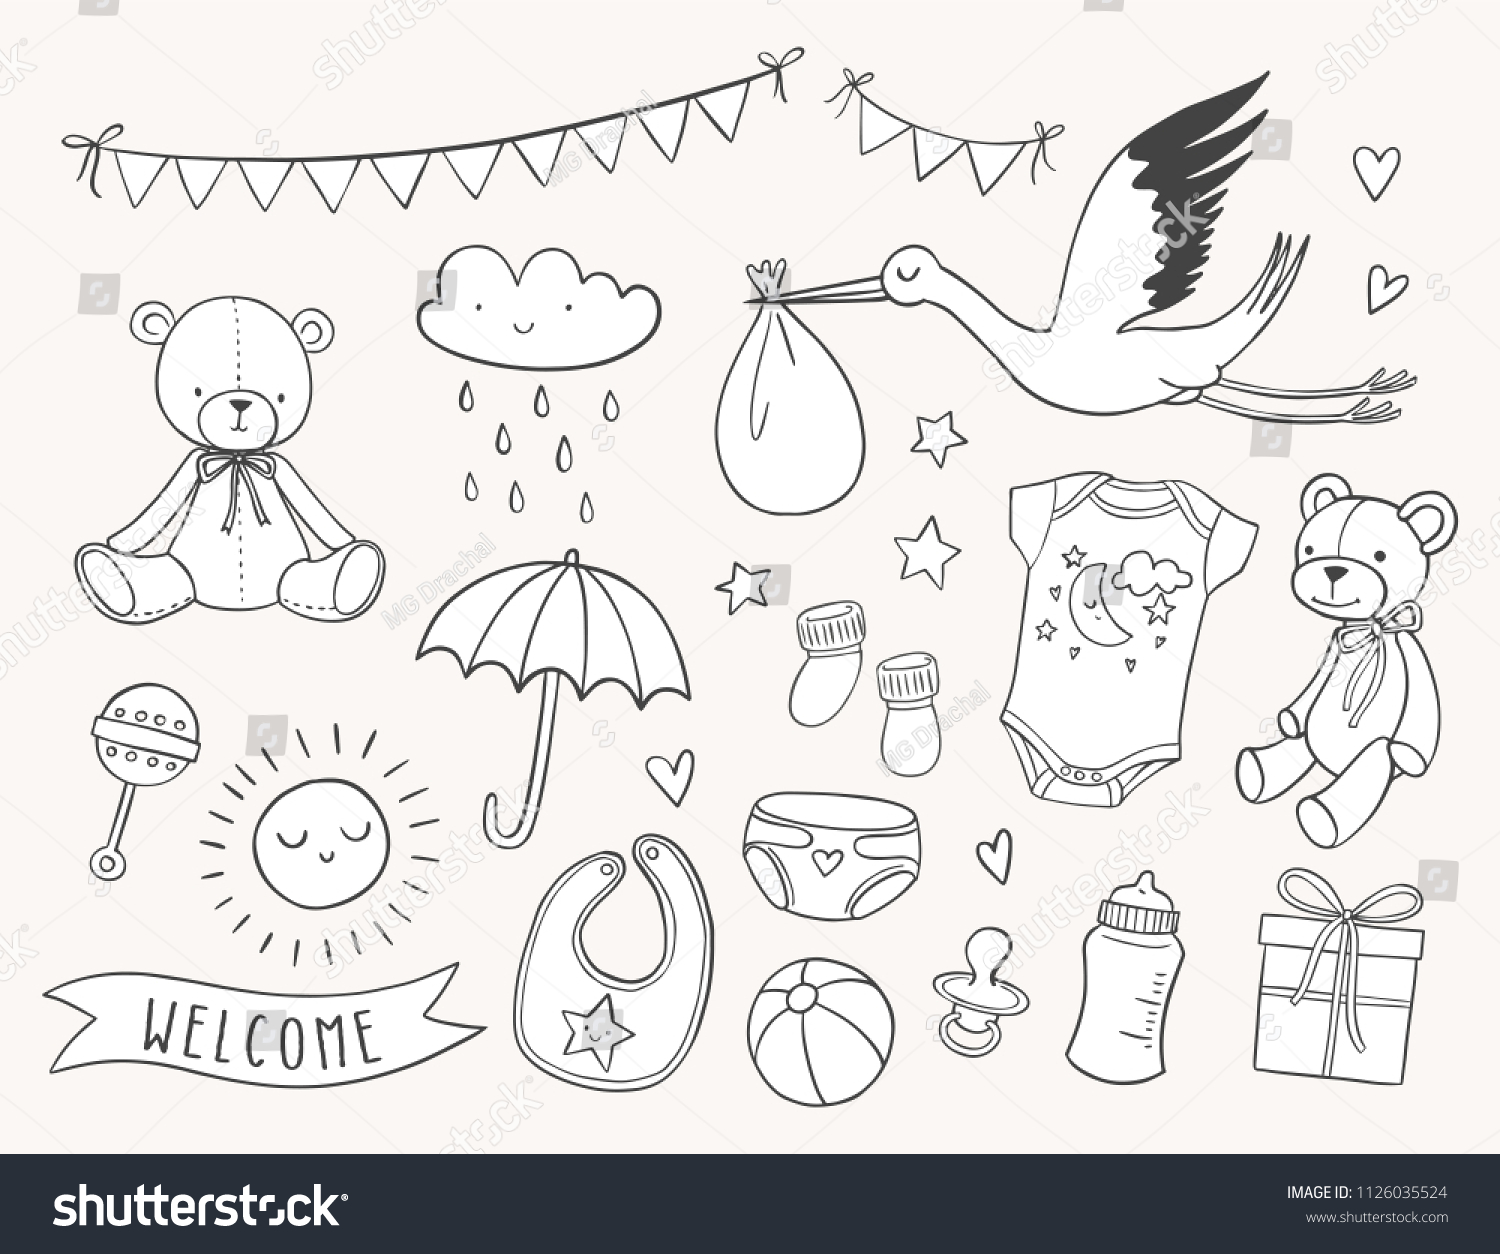 SVG of Baby shower hand drawn set. New baby items and icons. Cute doodle illustrations including teddy bear, baby clothes, bib, bottle, cloud, bunting banners, diaper, stork. svg